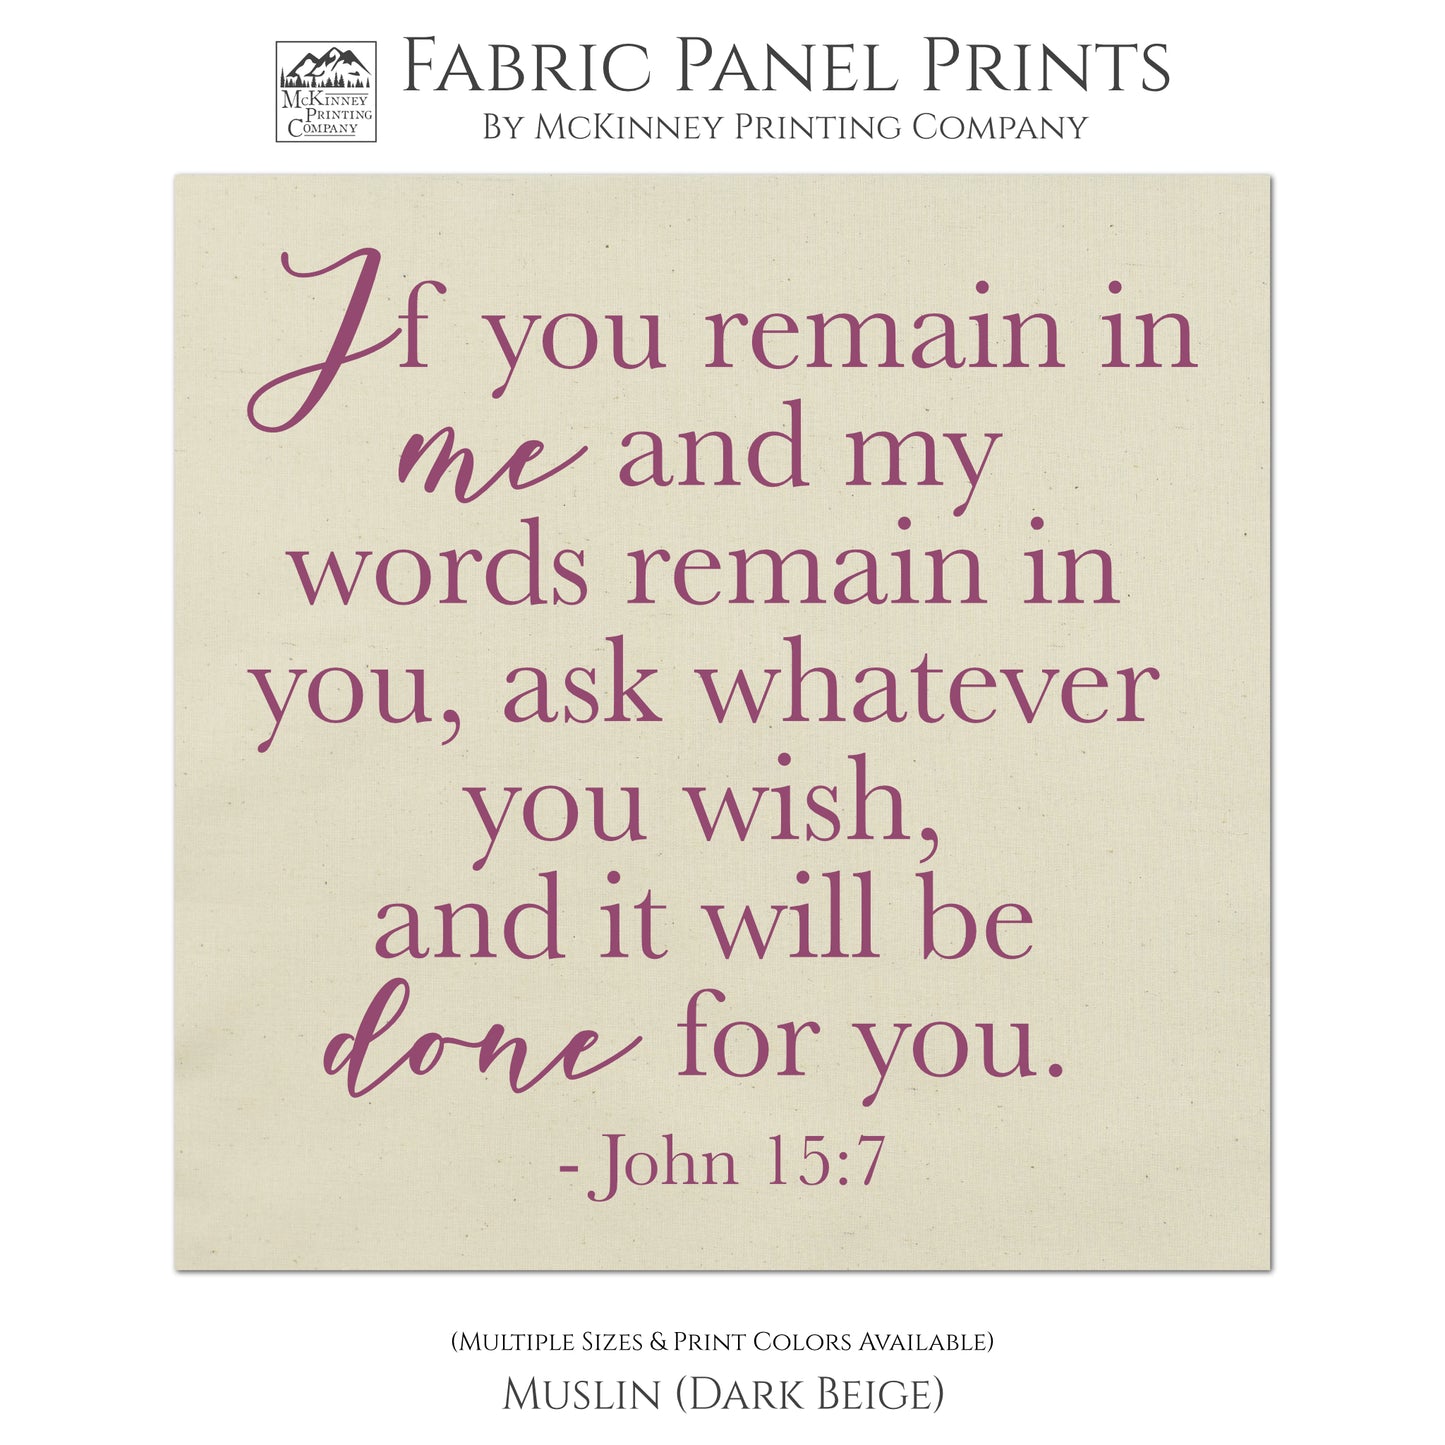 Bible Verse Wall Art - If you remain in me and my words remain in you, ask whatever you wish, and it will be done for you. - John 15 7 - Scripture Fabric, Quilt Block, Large, Small - Muslin